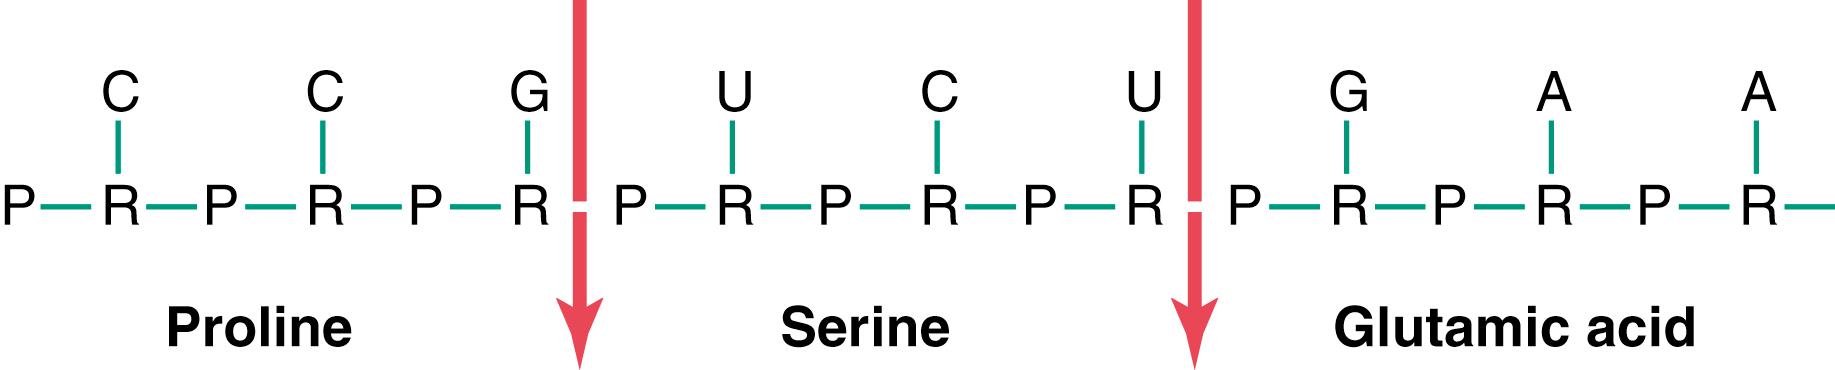 Figure 3-8., A portion of an RNA molecule showing three RNA codons—CCG, UCU, and GAA—that control attachment of the three amino acids, proline, serine, and glutamic acid, respectively, to the growing RNA chain.